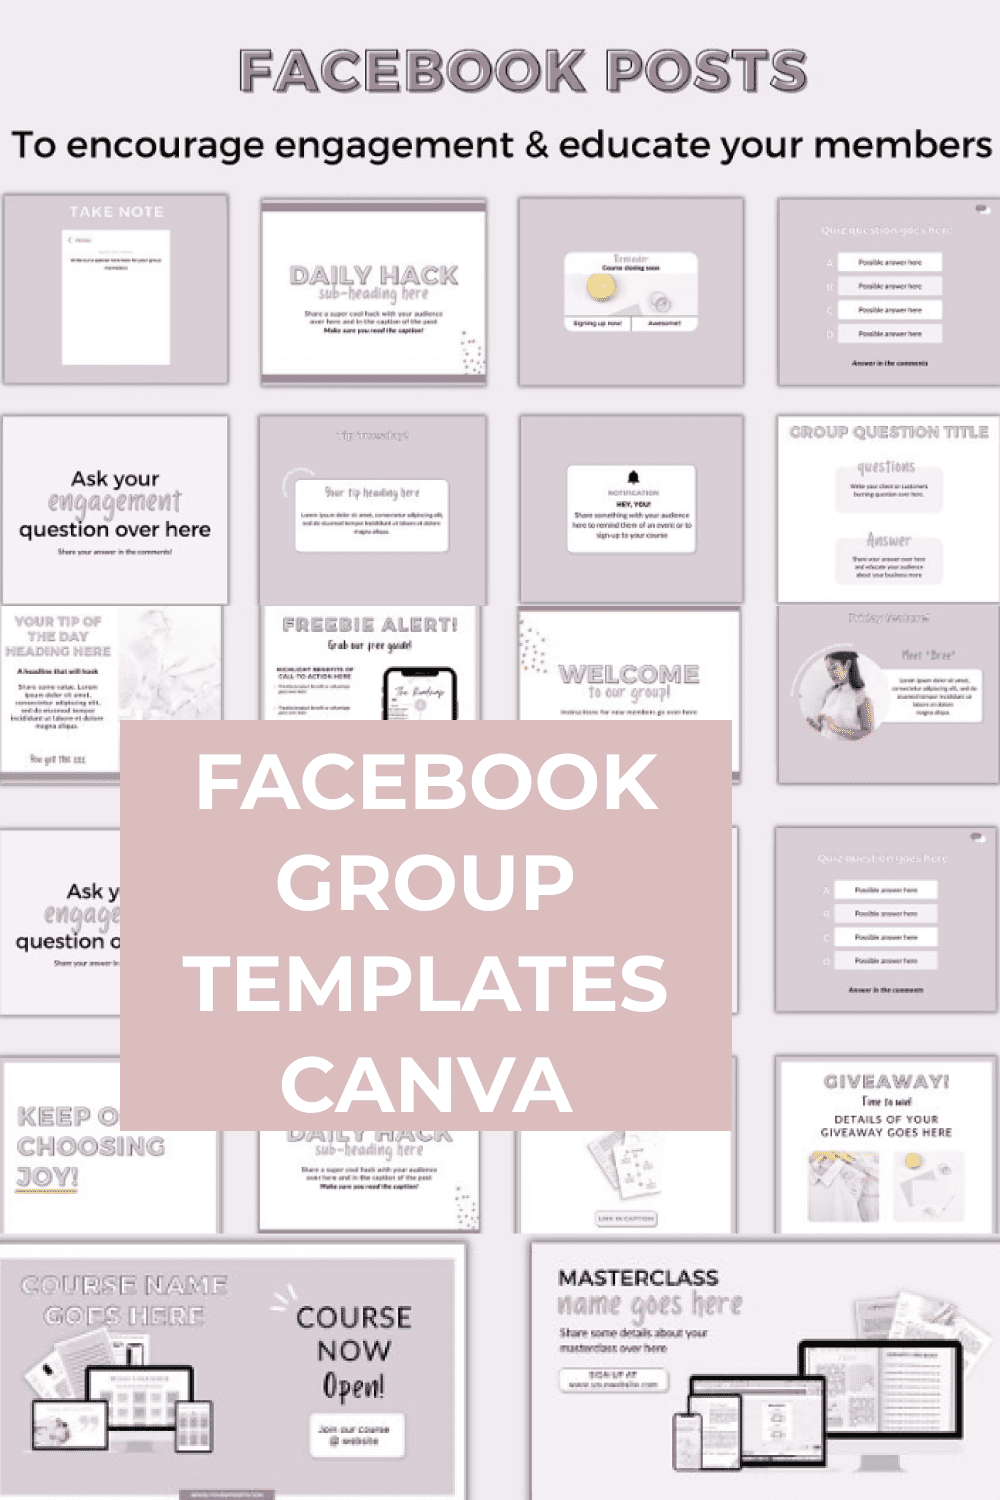 Facebook group templates canva with simple shapes and lines.